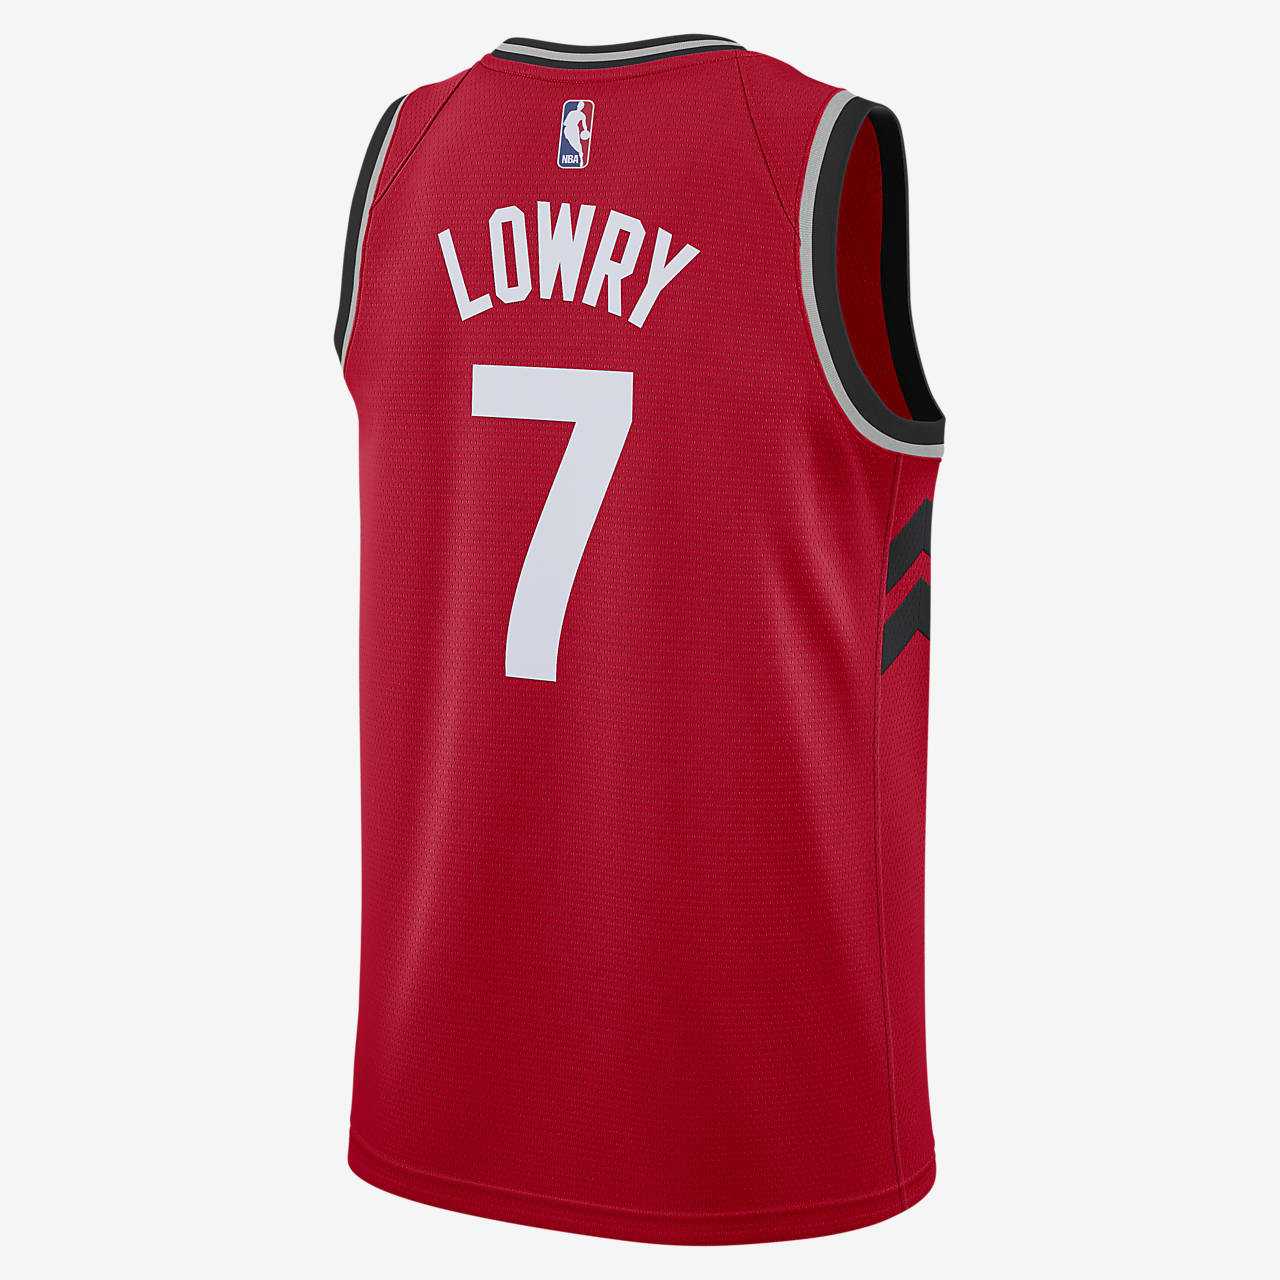 lowry signed jersey